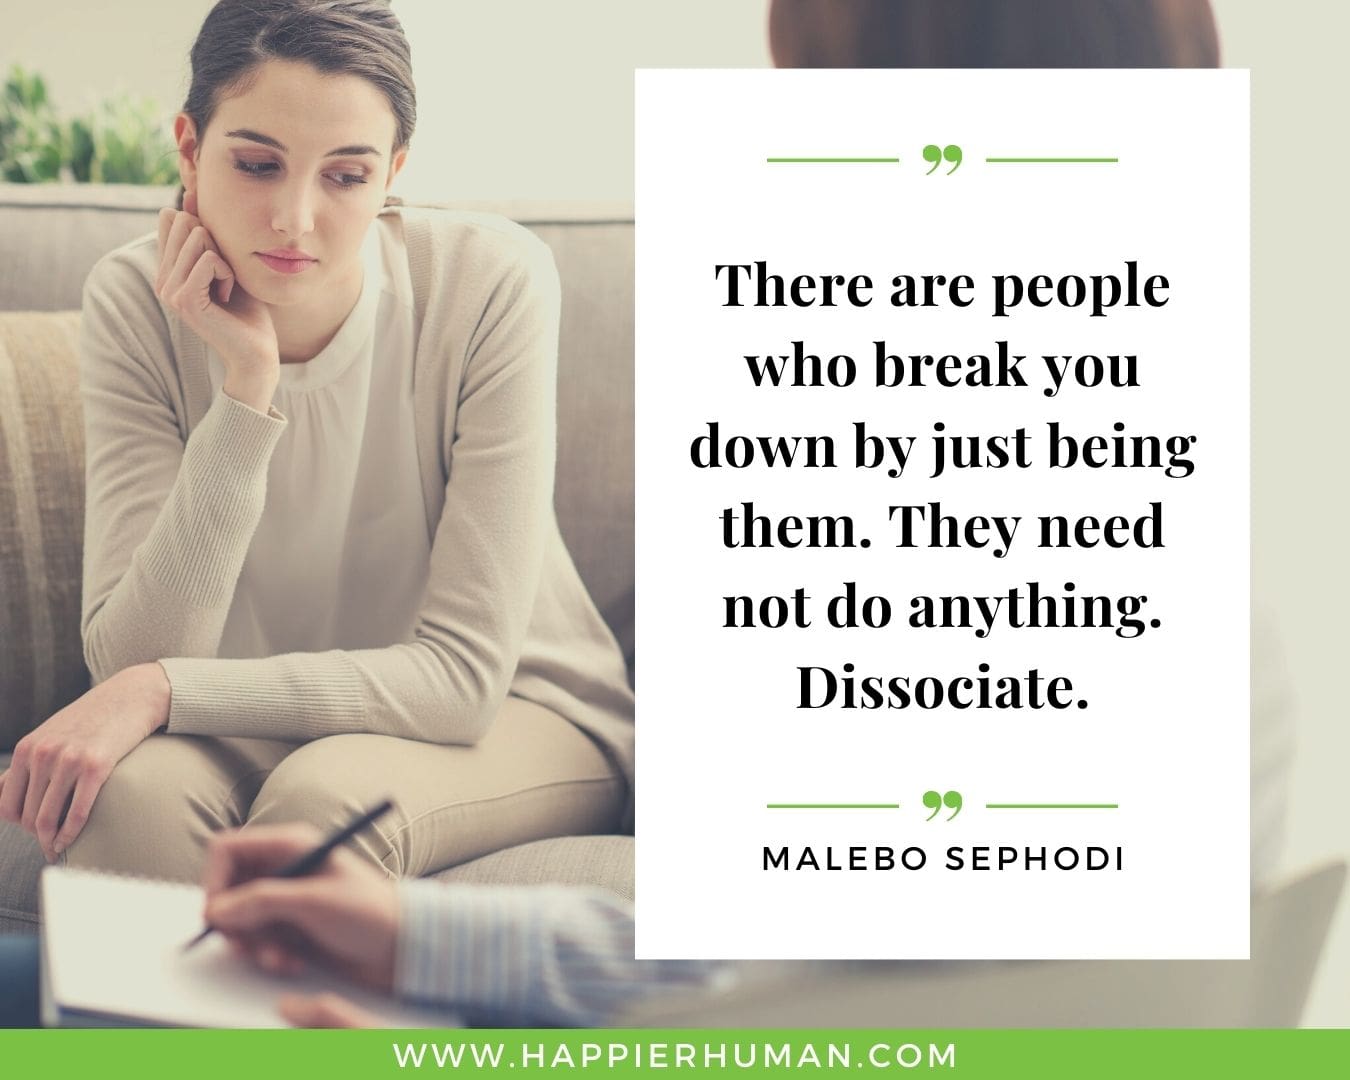 Toxic People Quotes - “There are people who break you down by just being them. They need not do anything. Dissociate.” – Malebo Sephodi